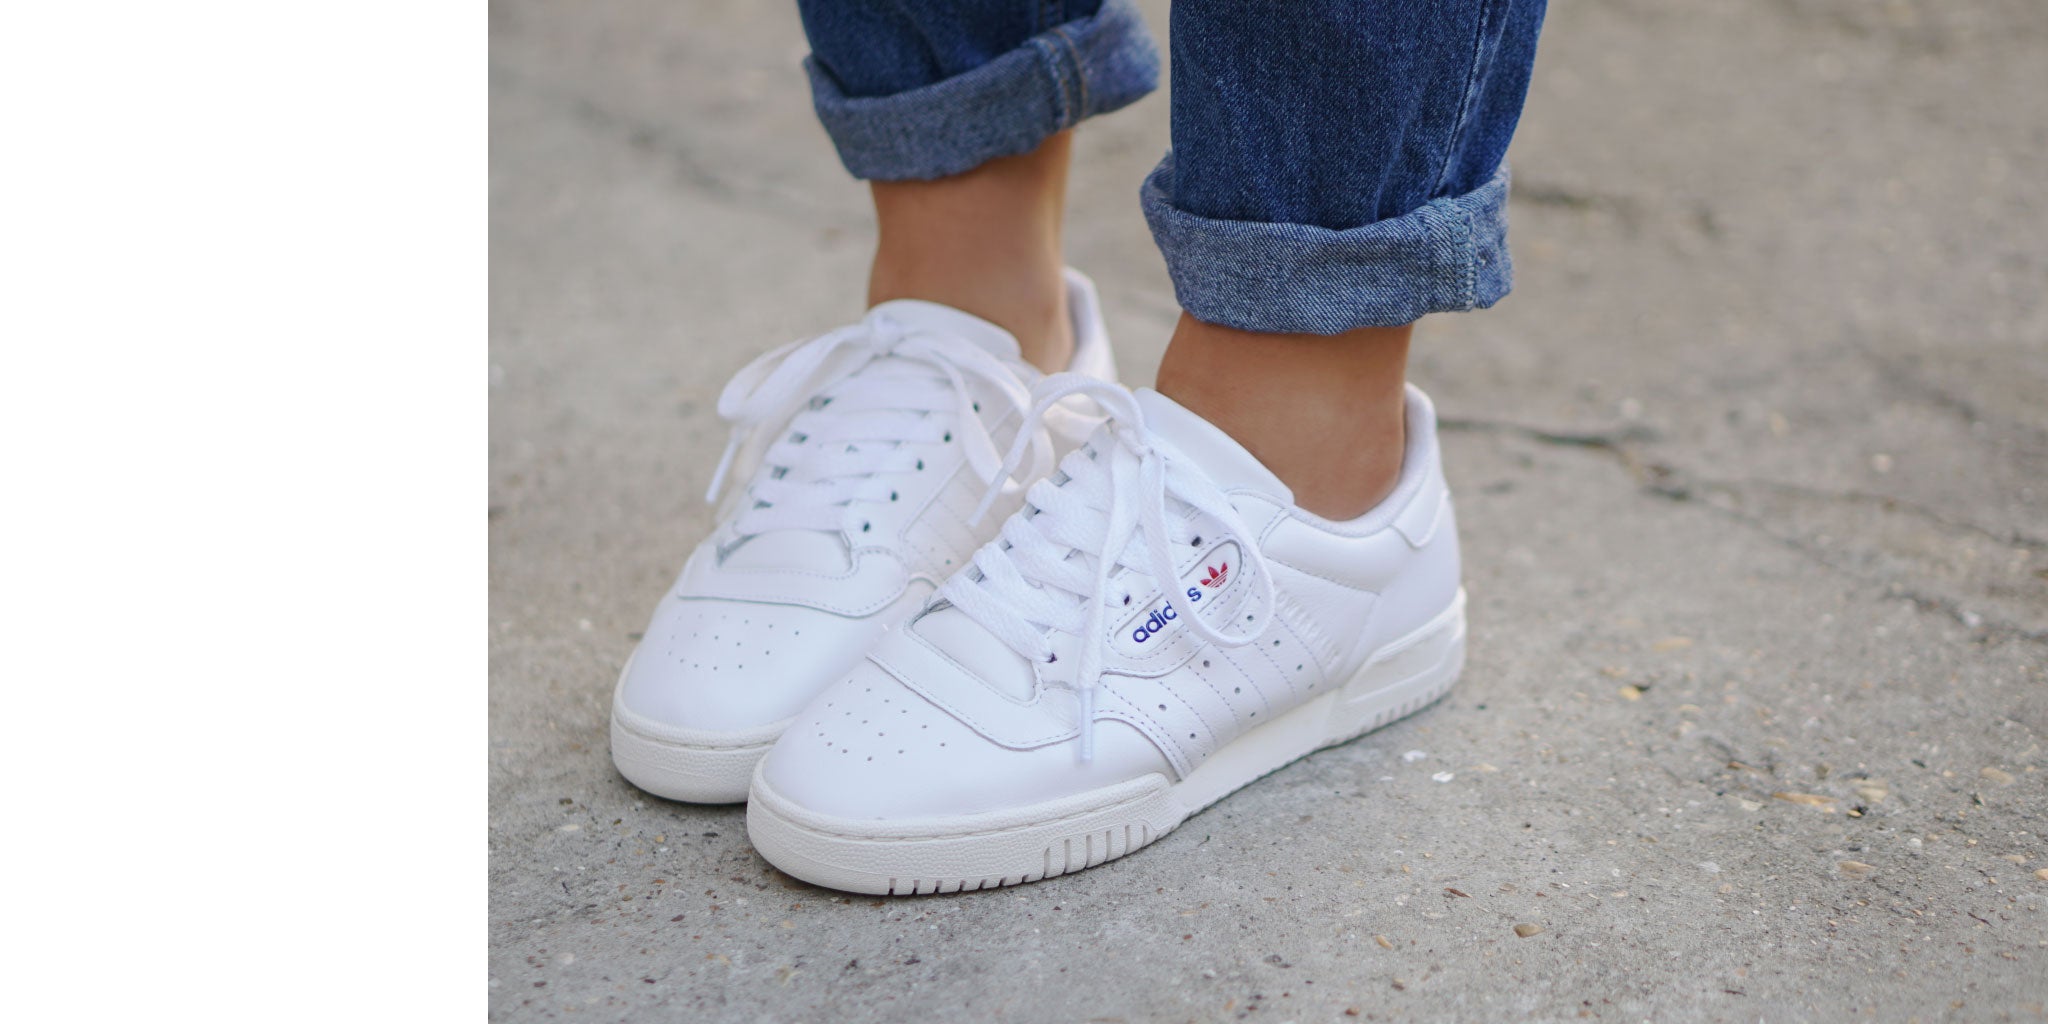 adidas powerphase release